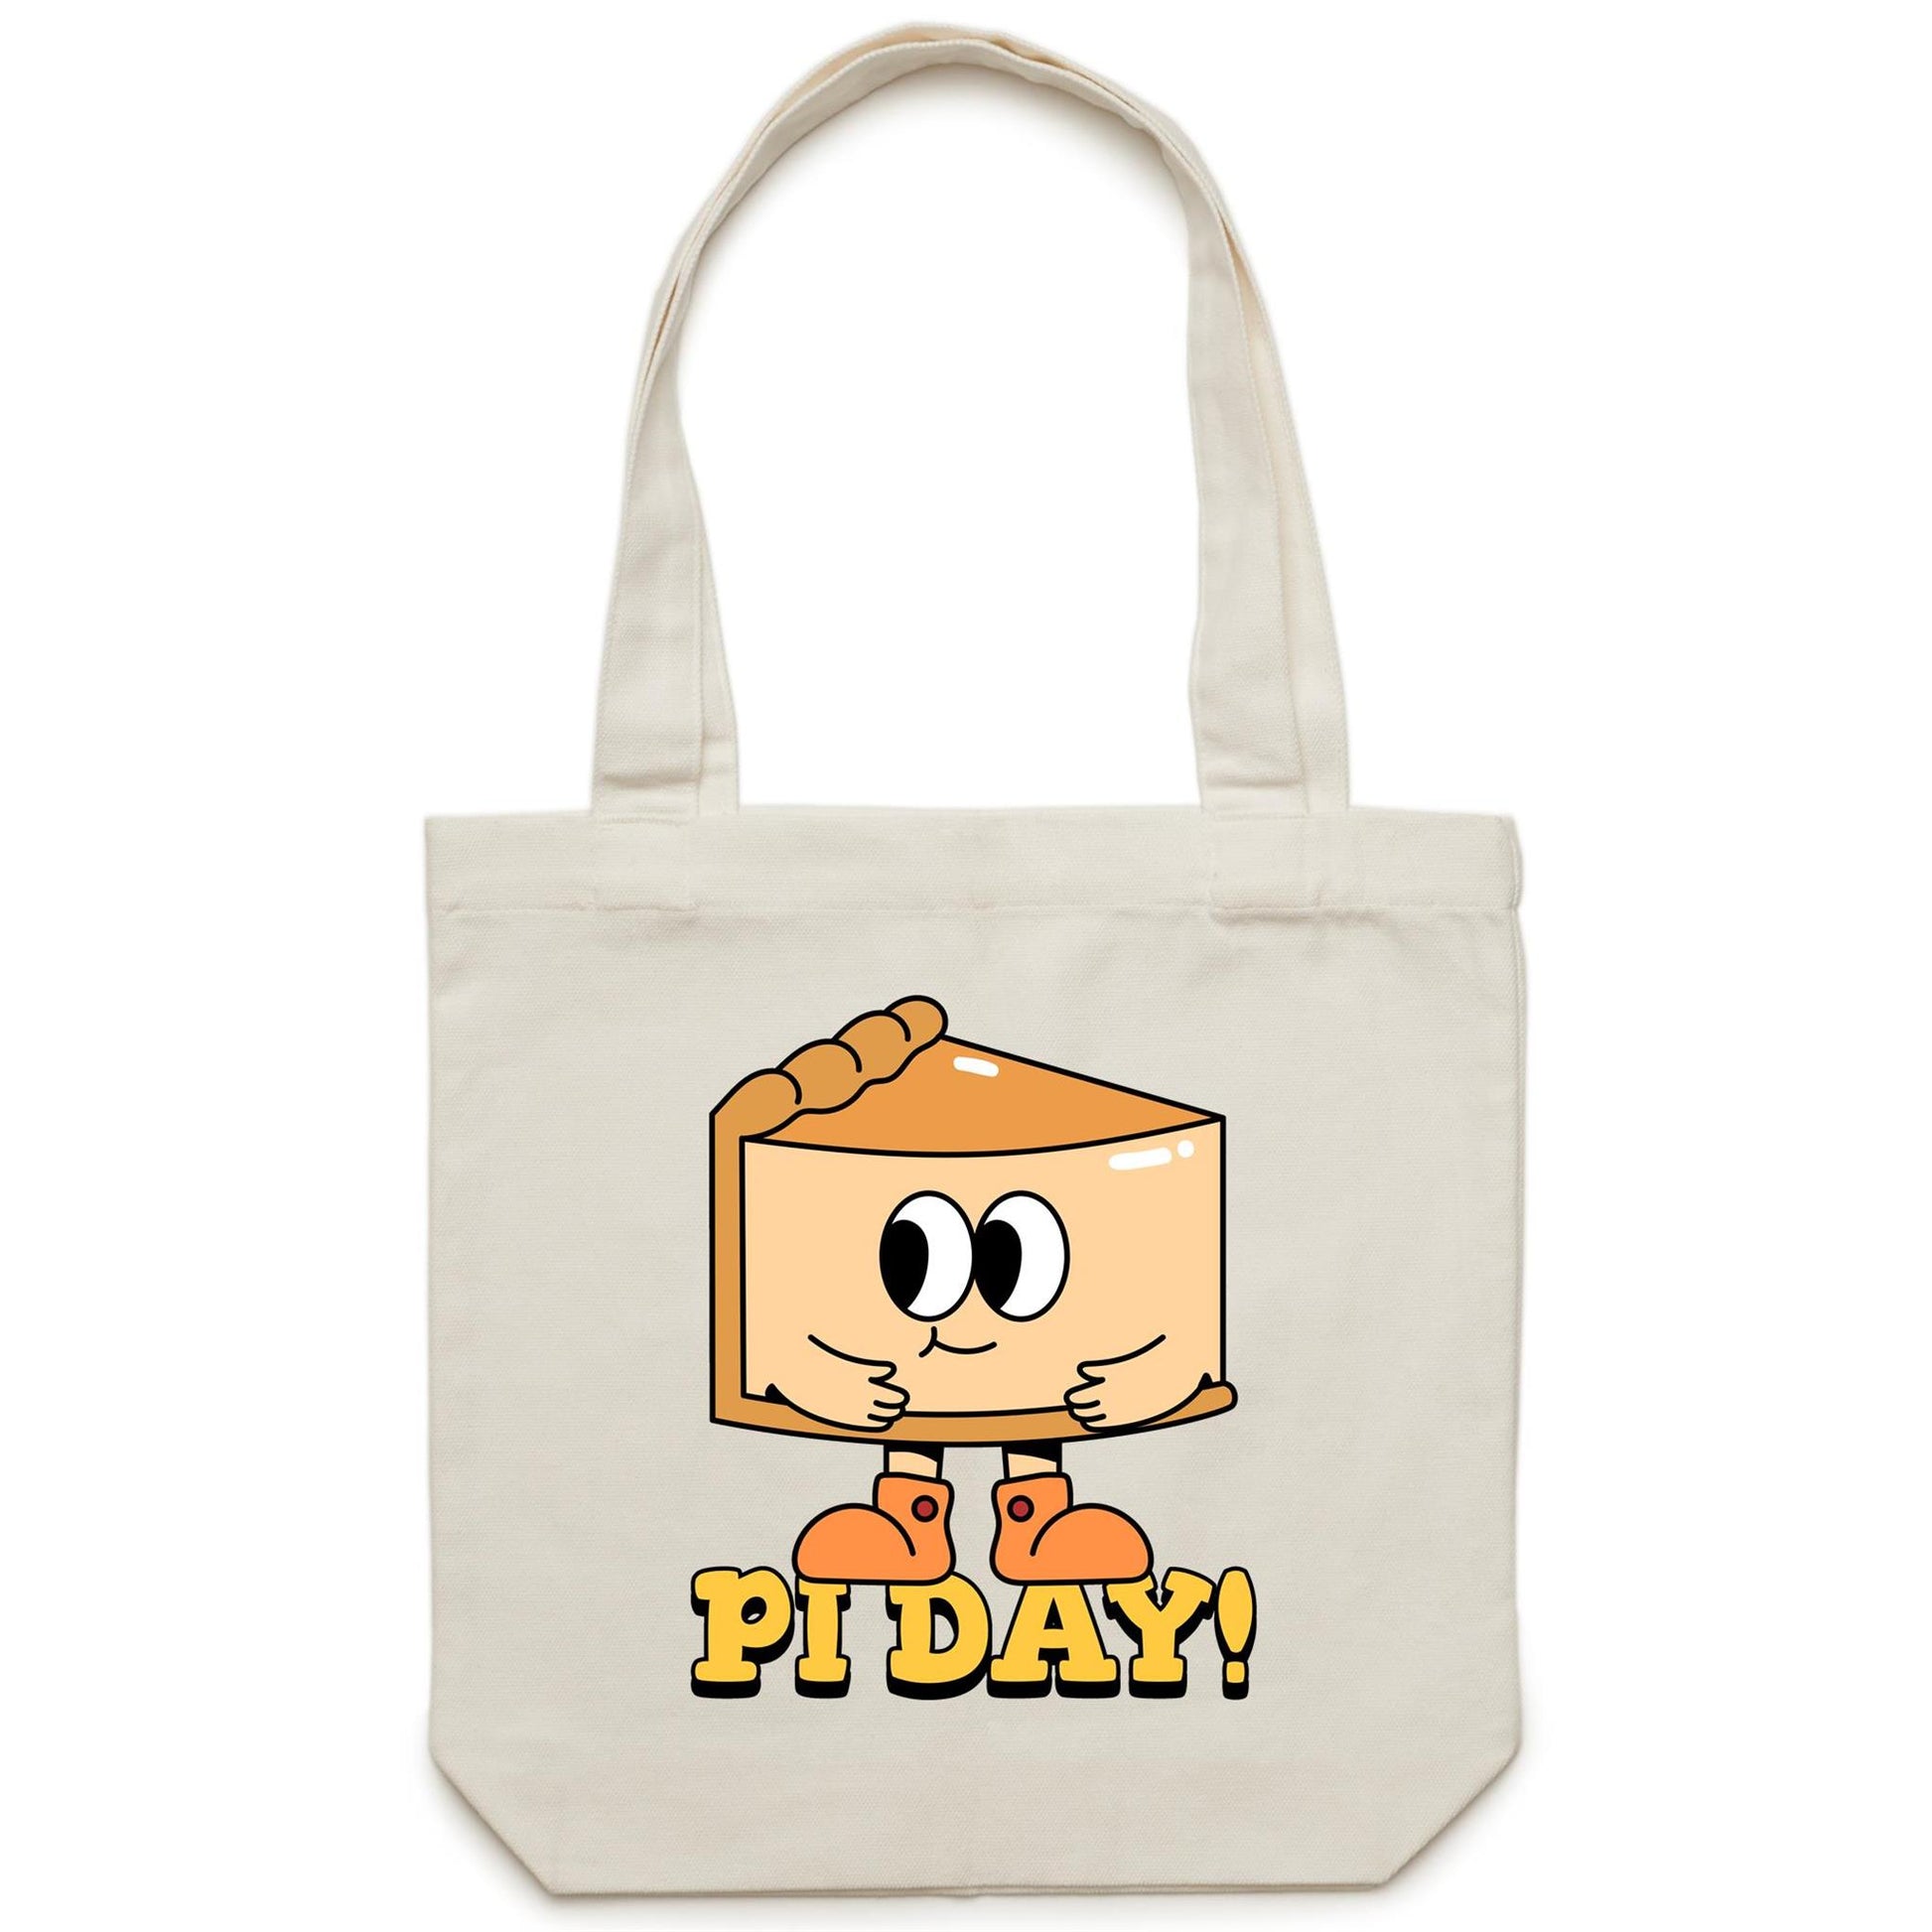 Pi Day - Canvas Tote Bag Cream One Size Tote Bag Maths Science